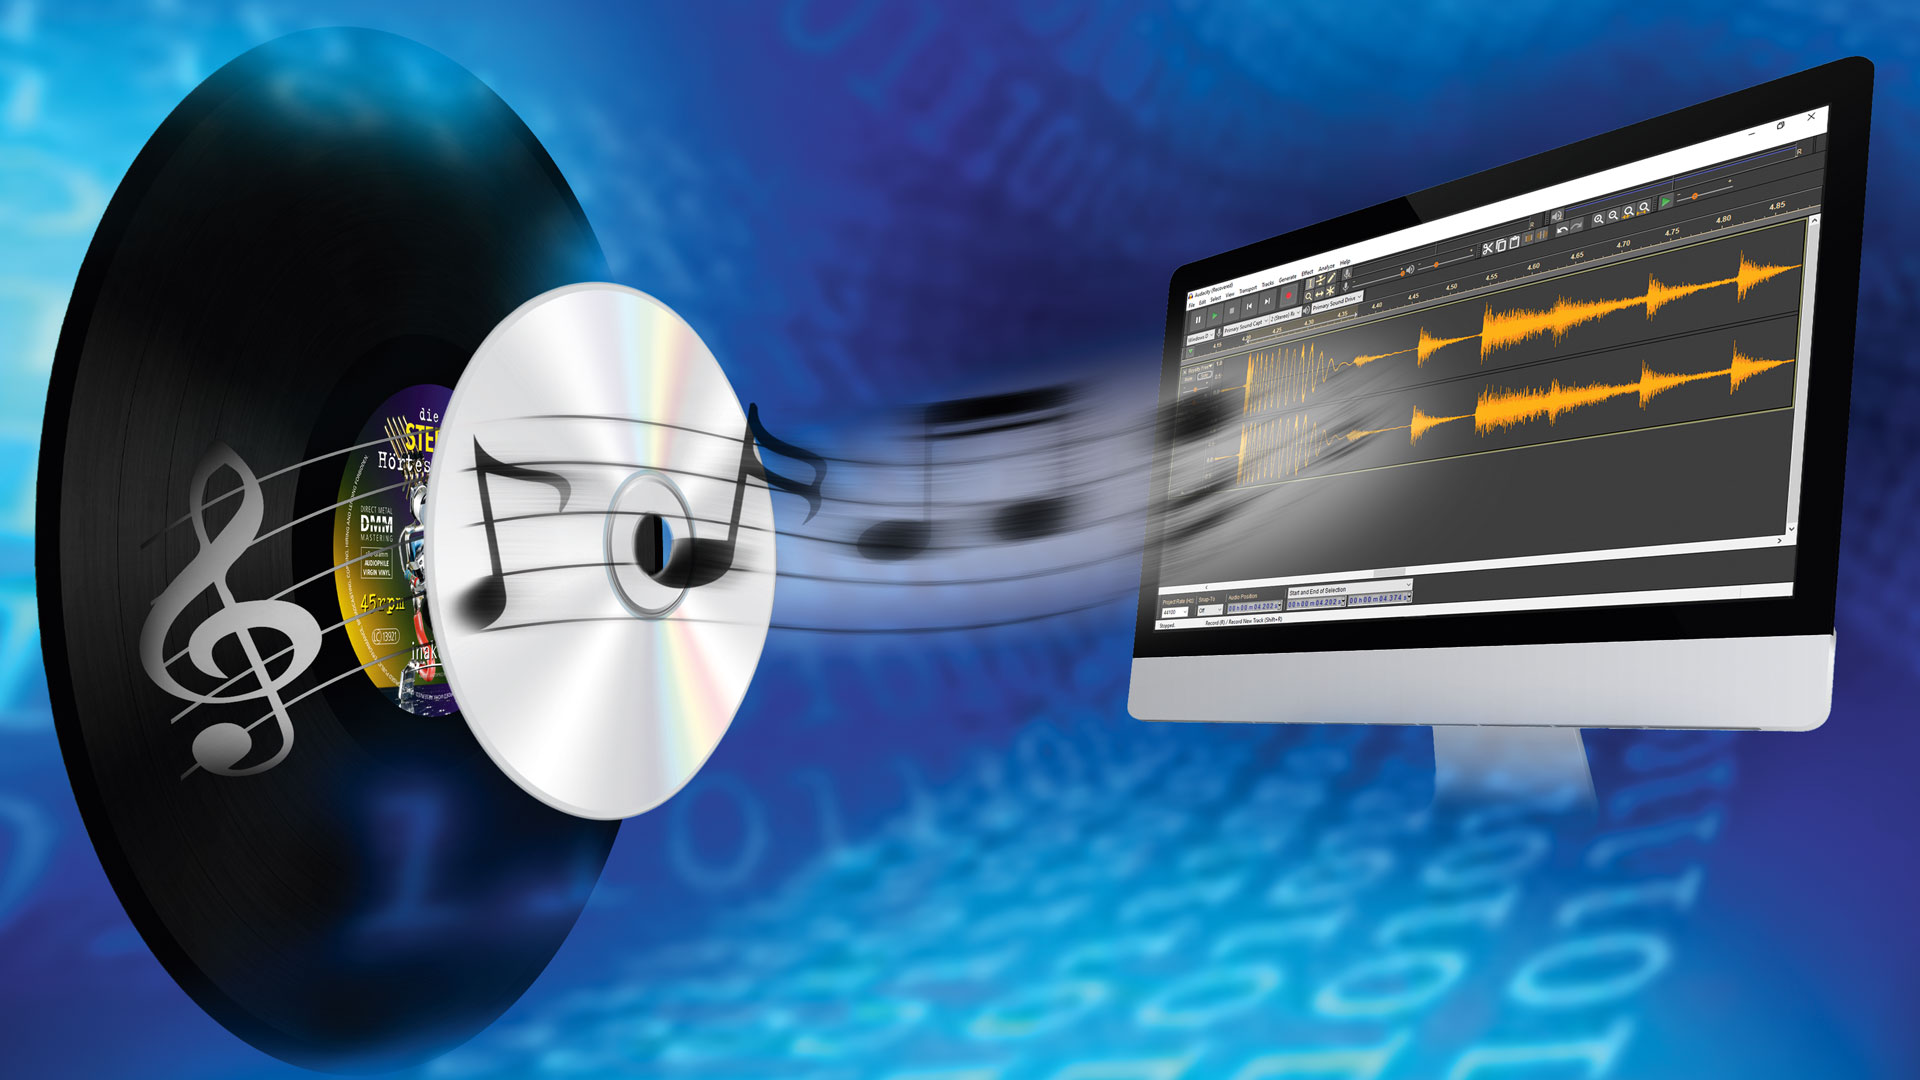 How To: Back-up all your Music CDs and stream them as high quality digital  files